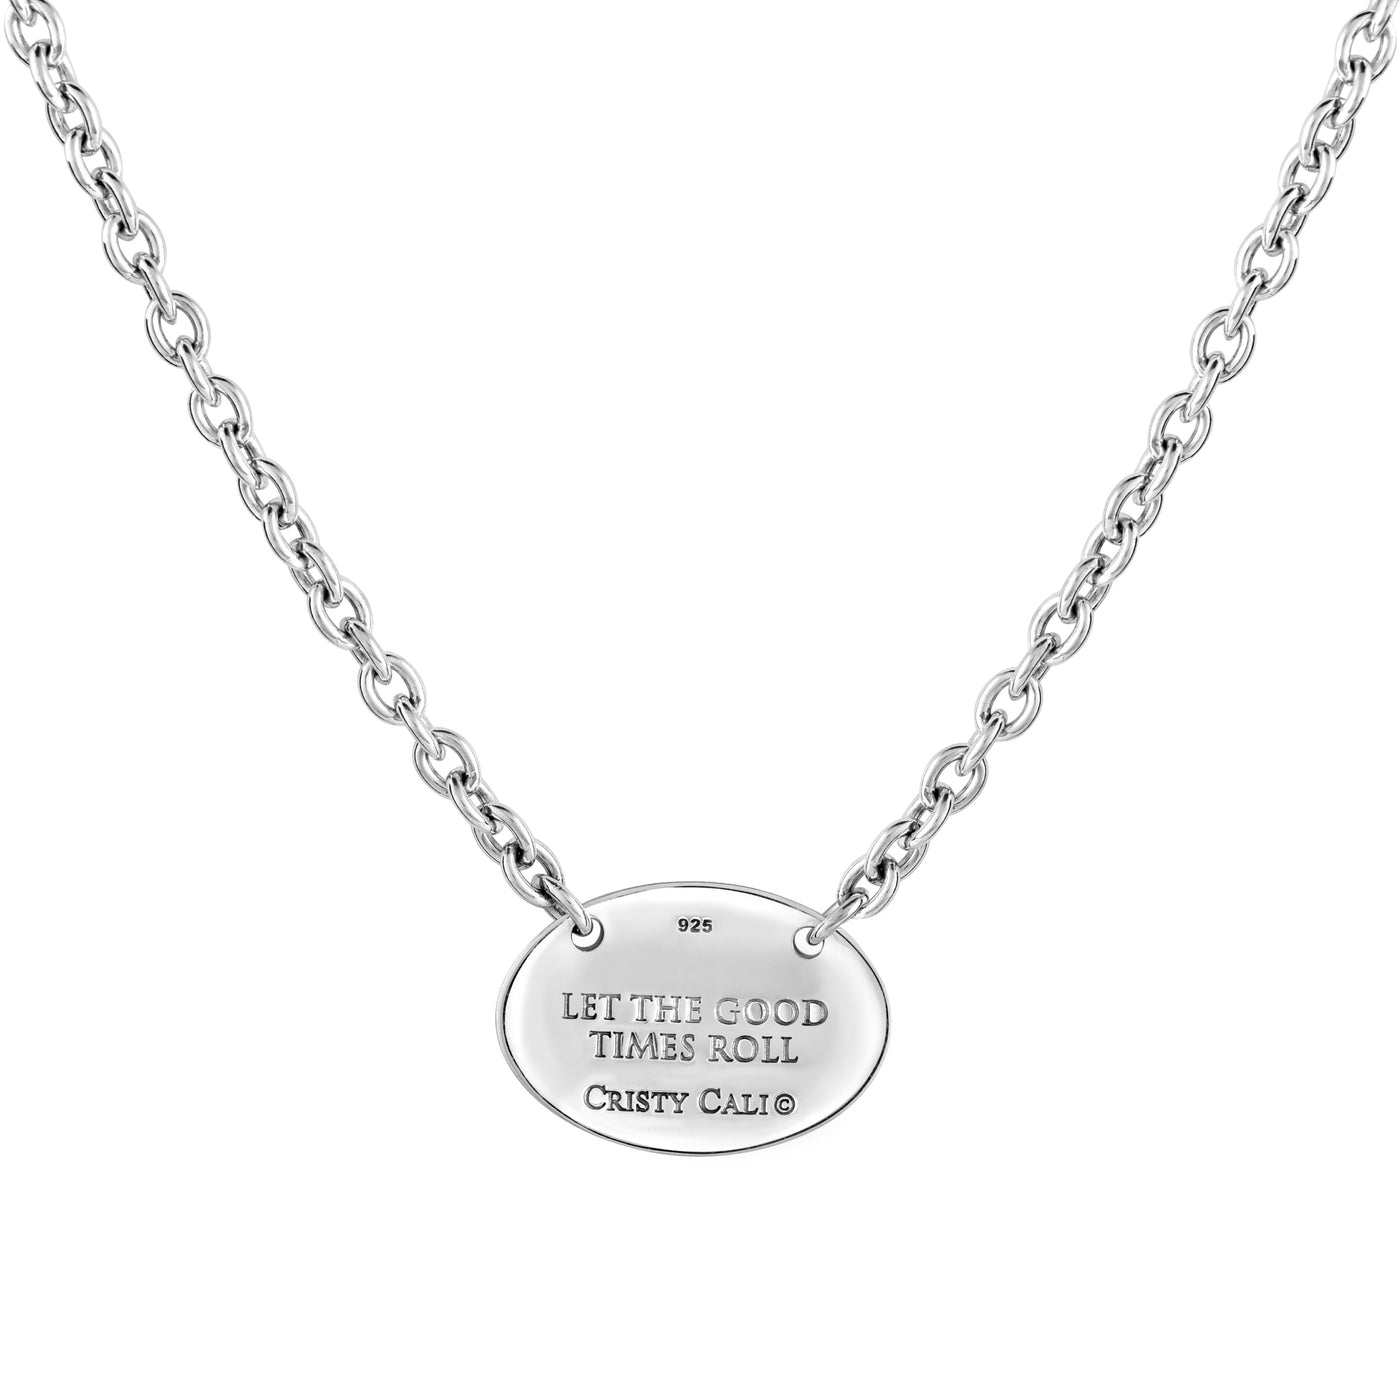 Please Return to New Orleans Oval Necklace - Large